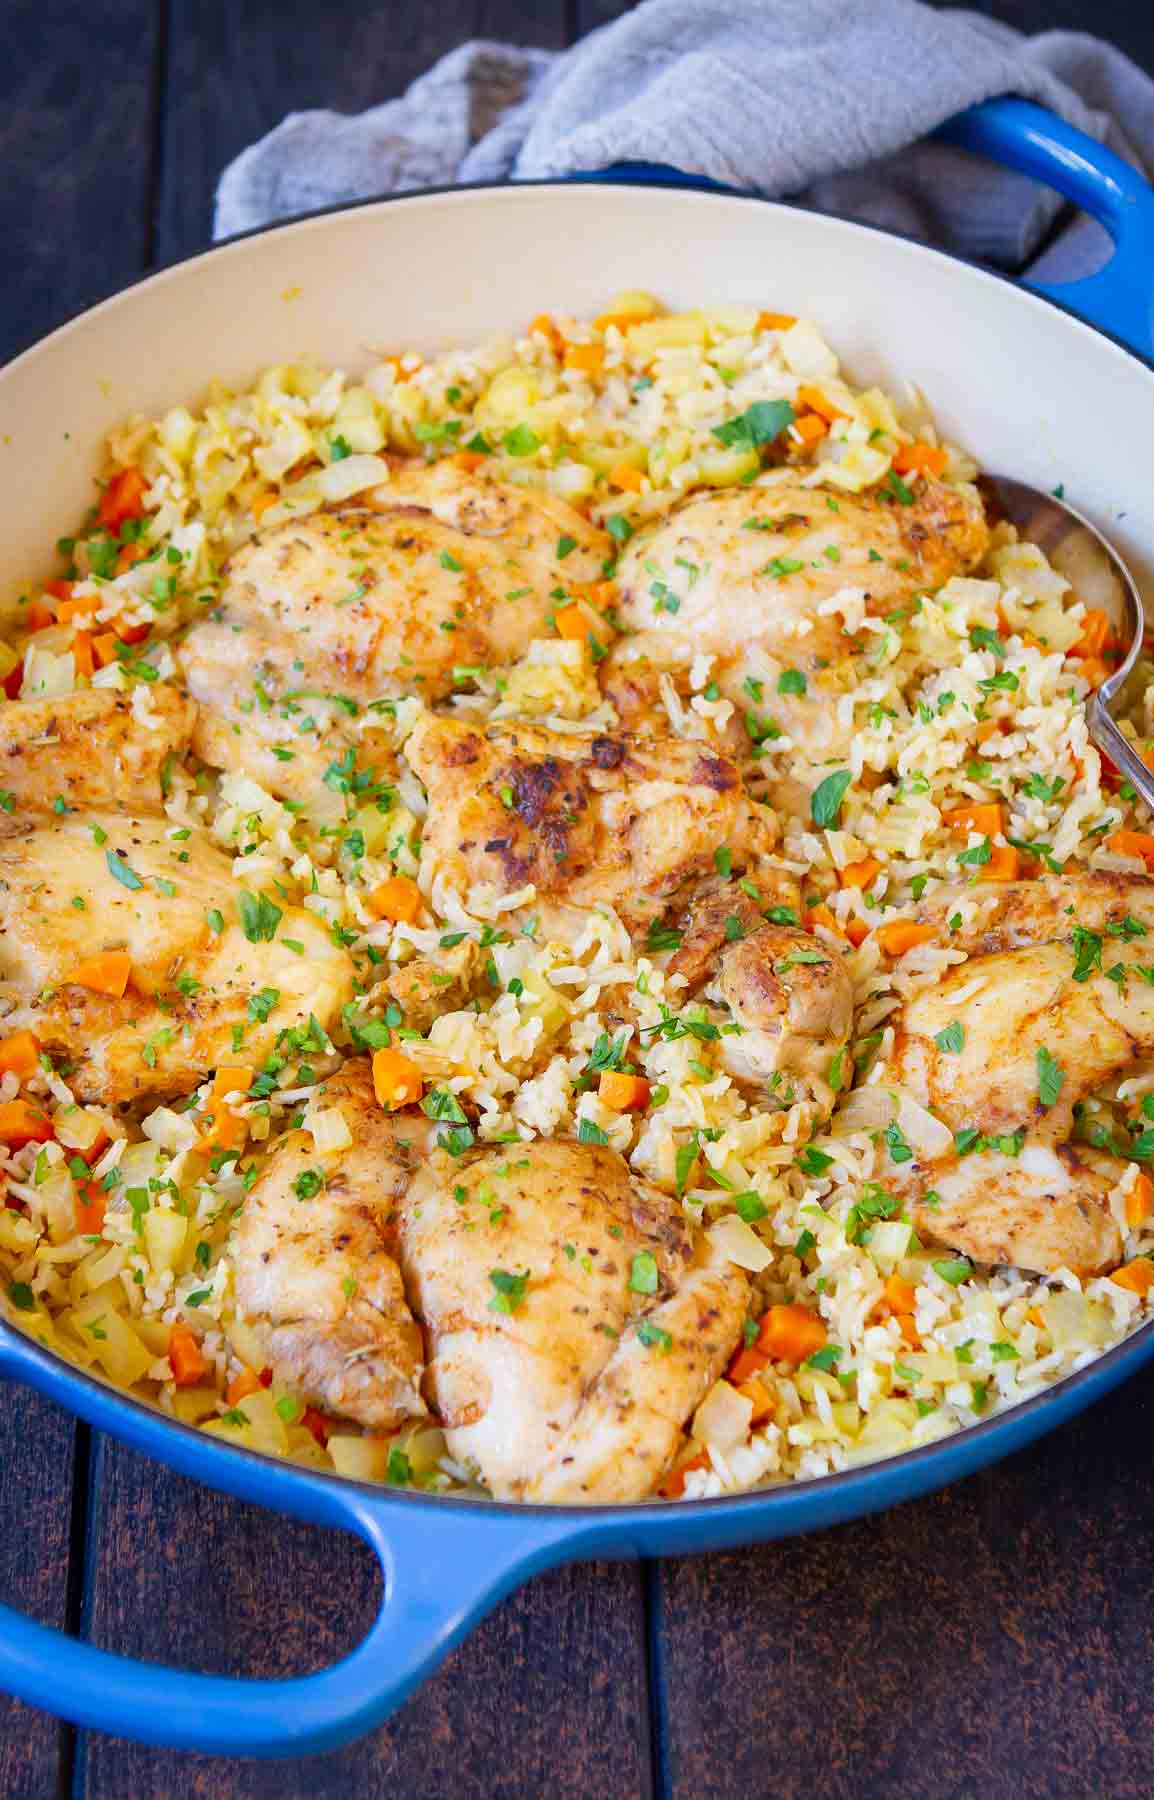 Cooked chicken and rice with spices and vegetables in a blue skillet.